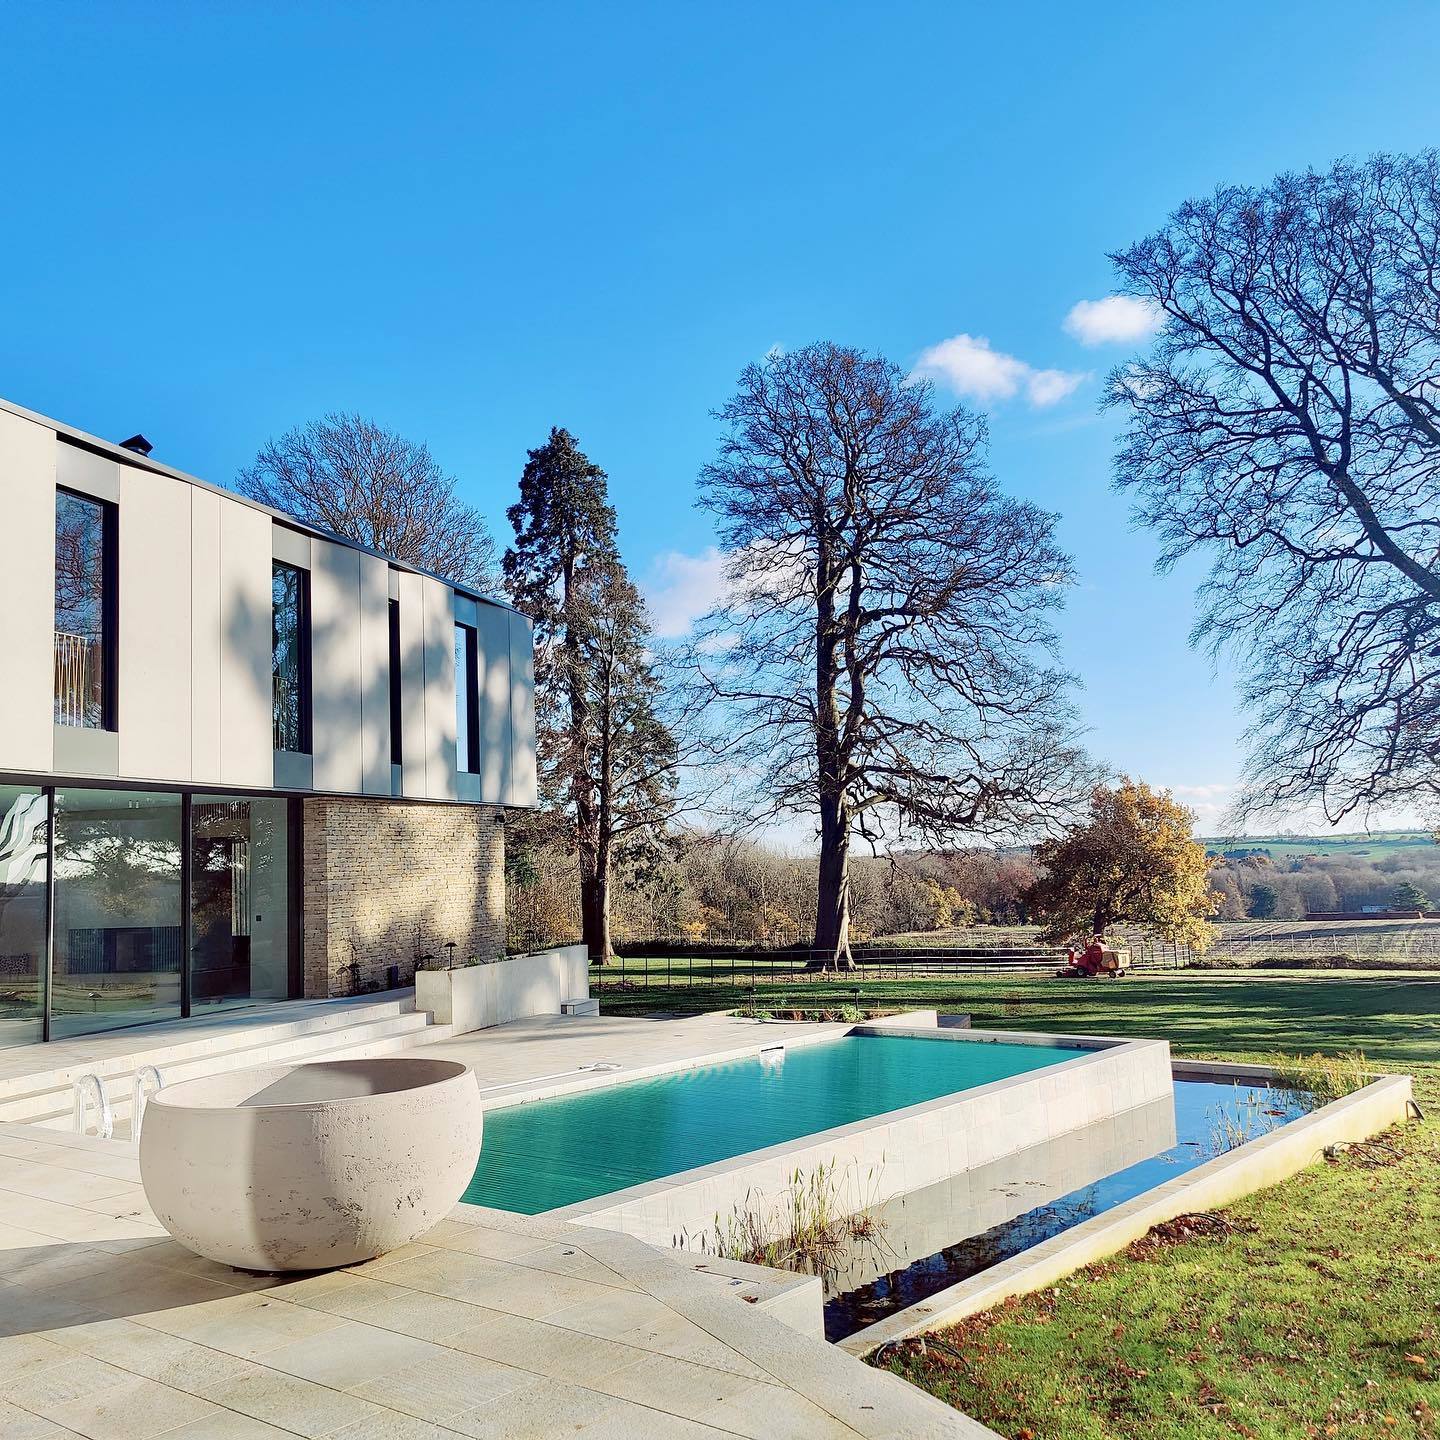 Rear view showing swimming pool of luxury new build development